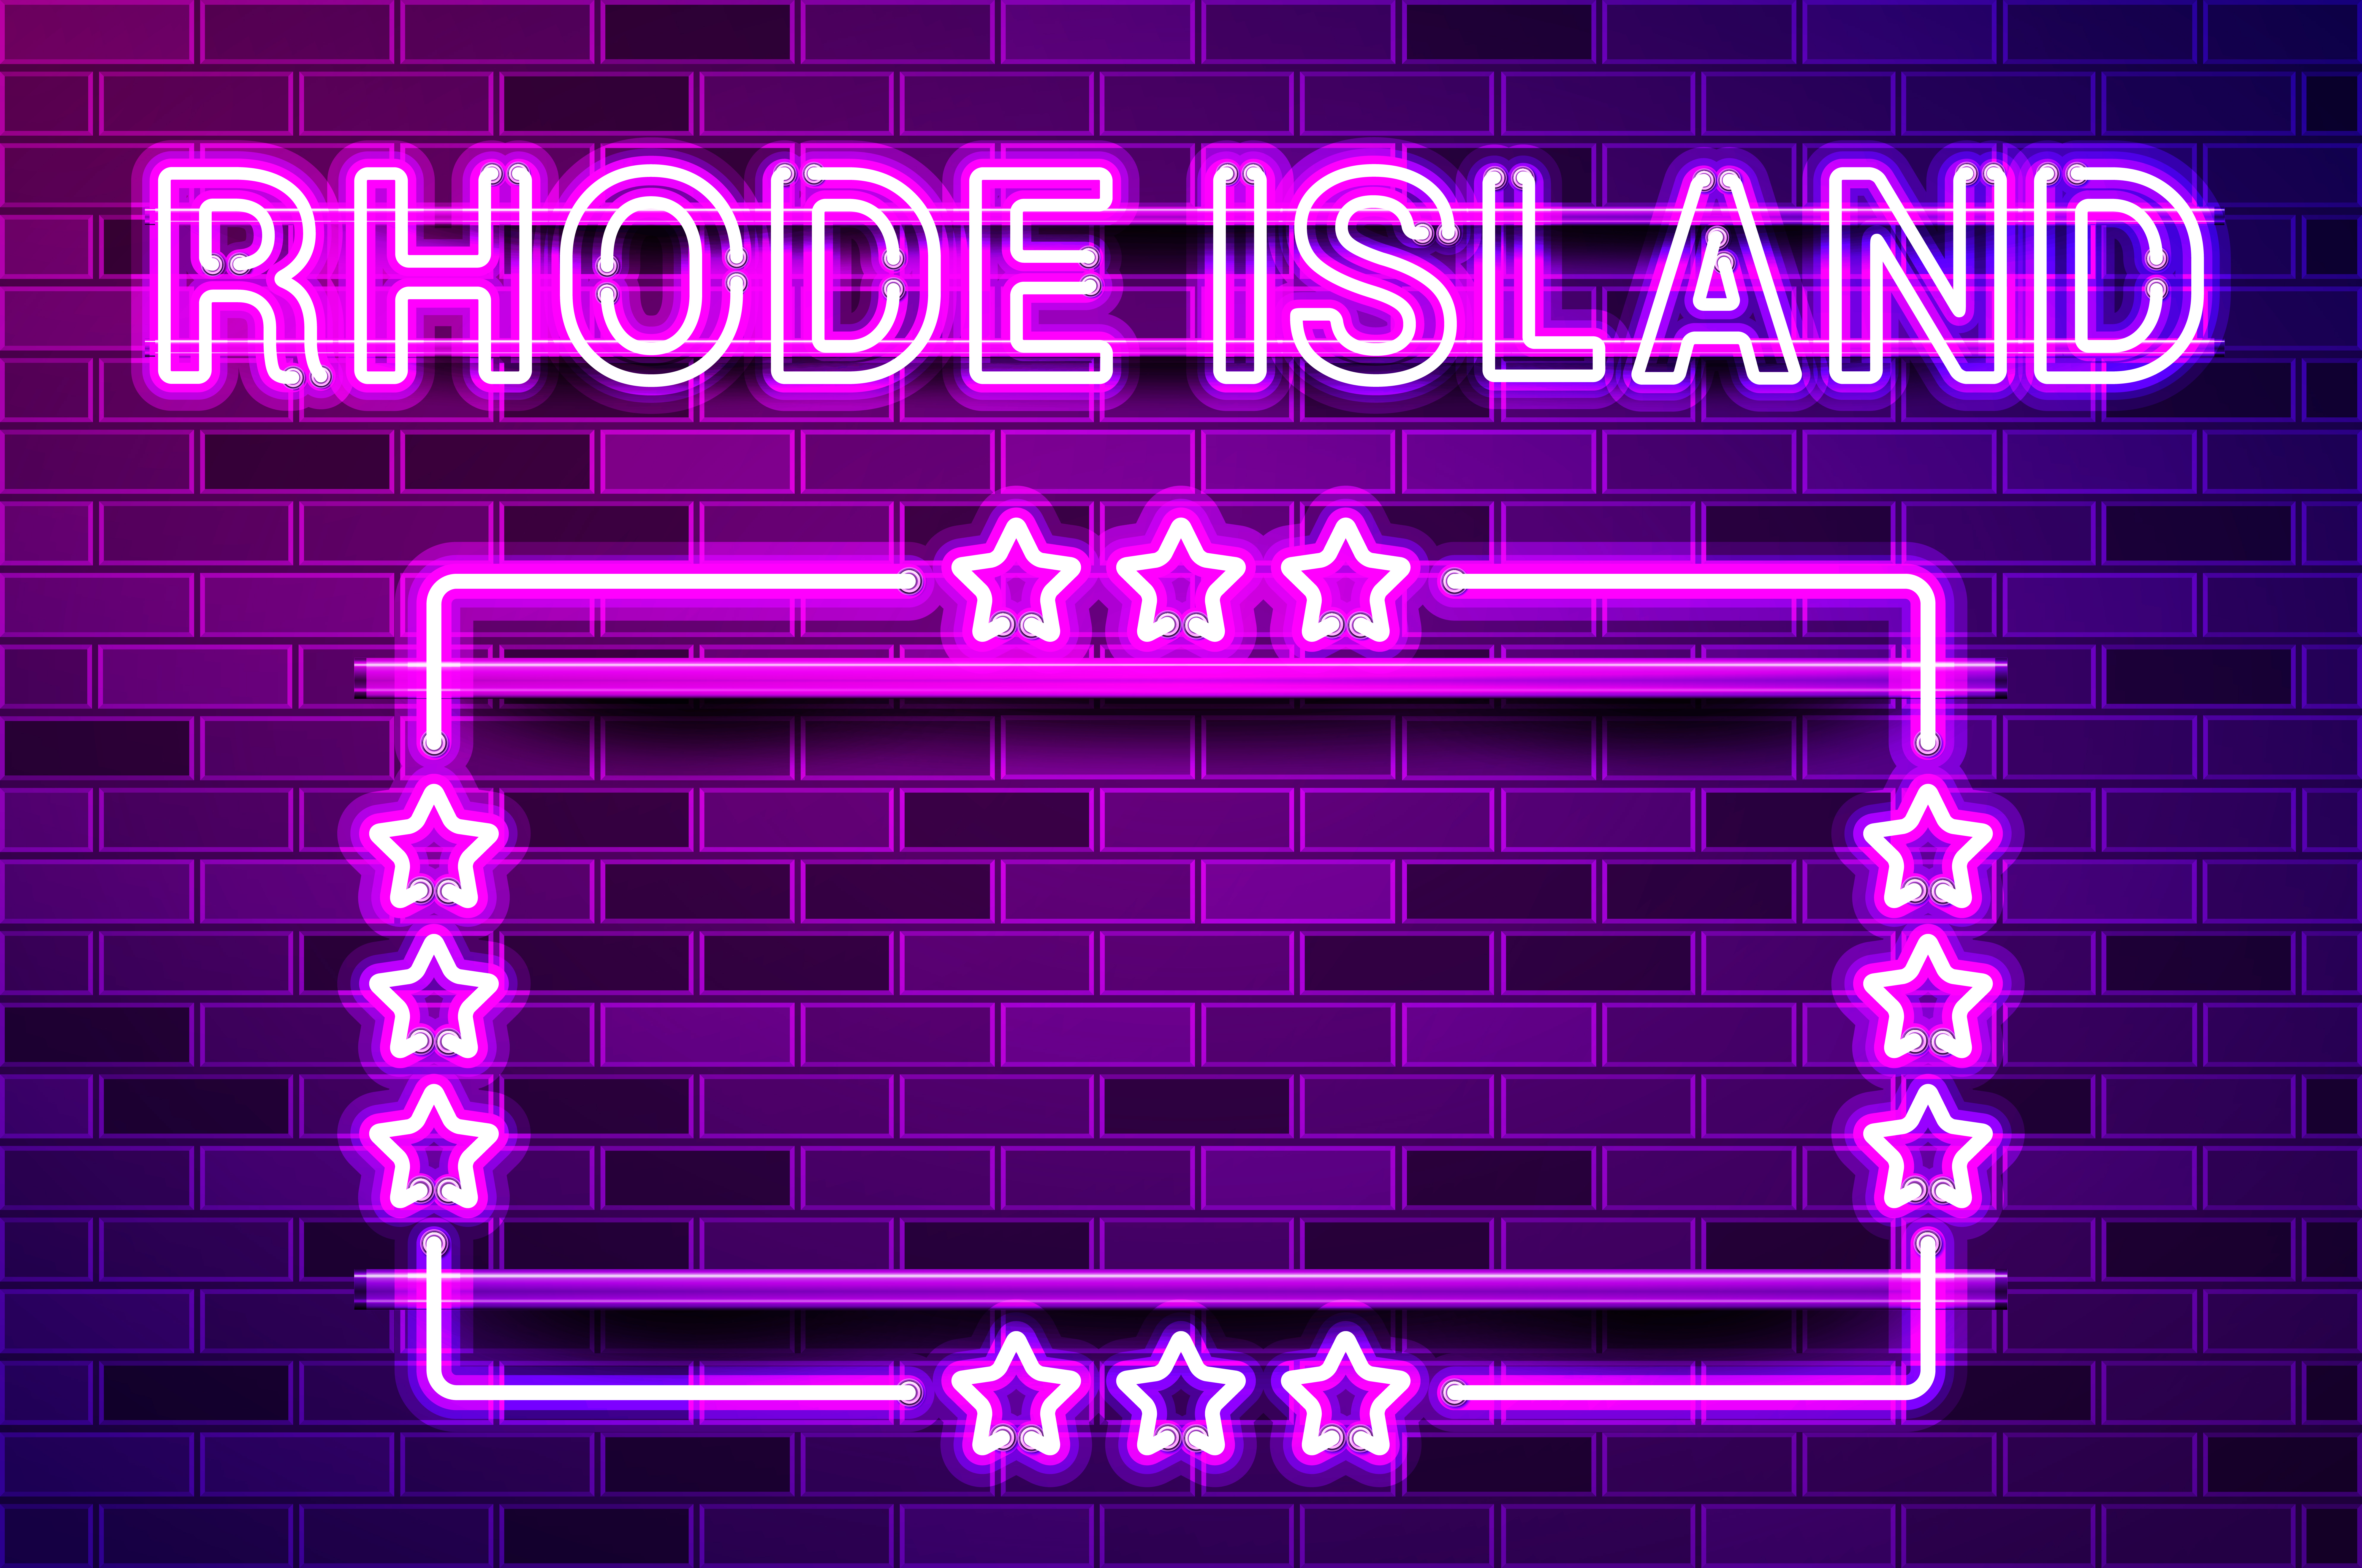 Rhode Island US State glowing purple neon lettering and a rectangular frame with stars. Realistic vector illustration. Purple brick wall, violet glow, metal holders.. Rhode Island US State glowing purple neon lettering and a rectangular frame with stars